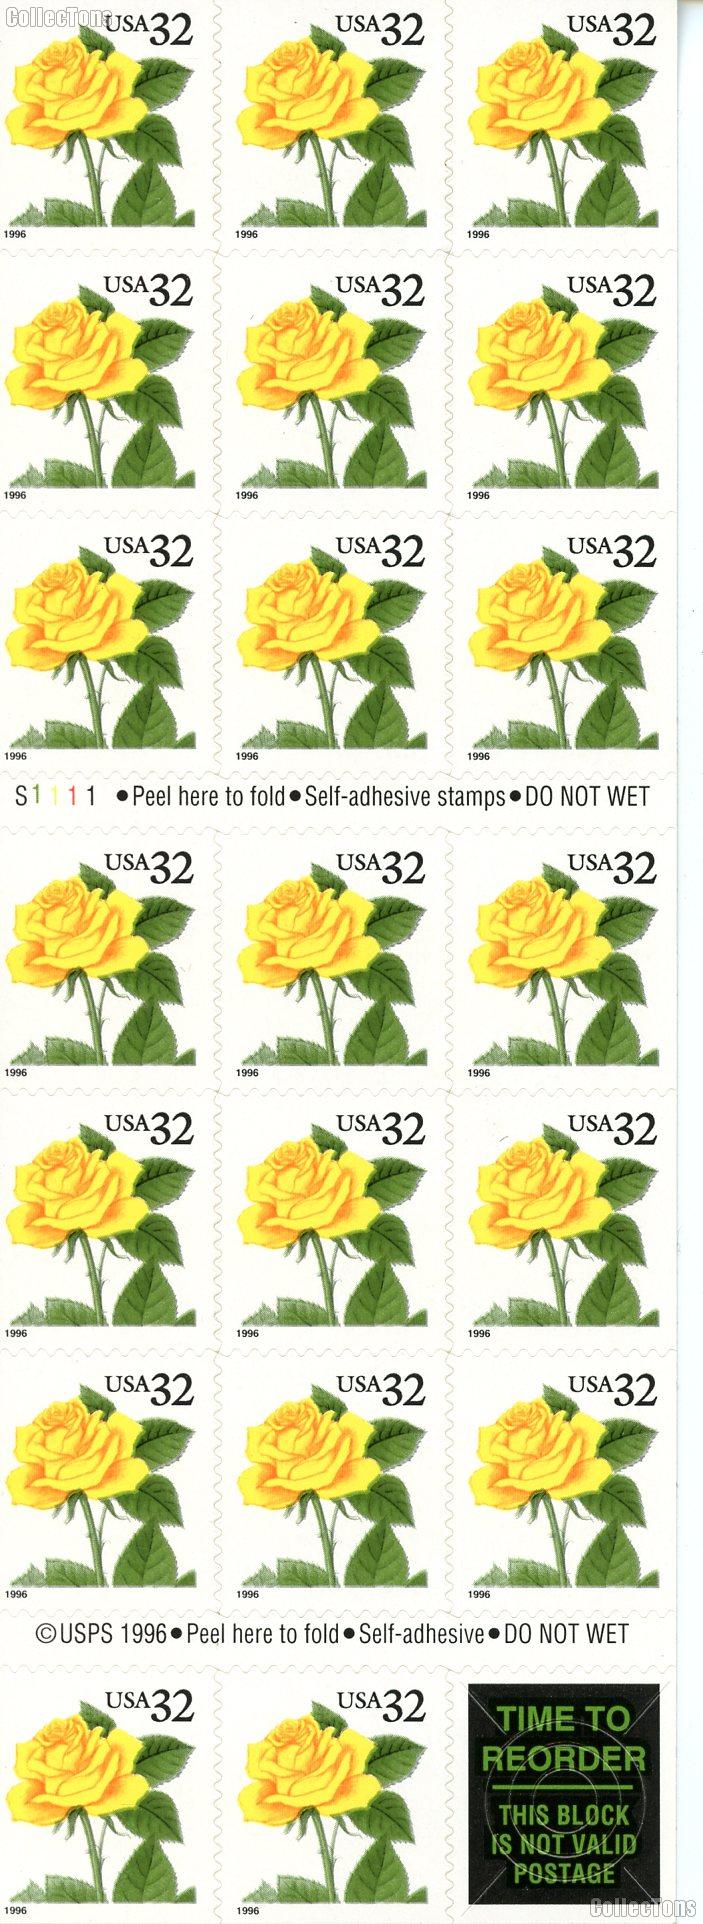 1996 Yellow Rose 32 Cent US Postage Stamp MNH Booklet of 20 Scott #3049a